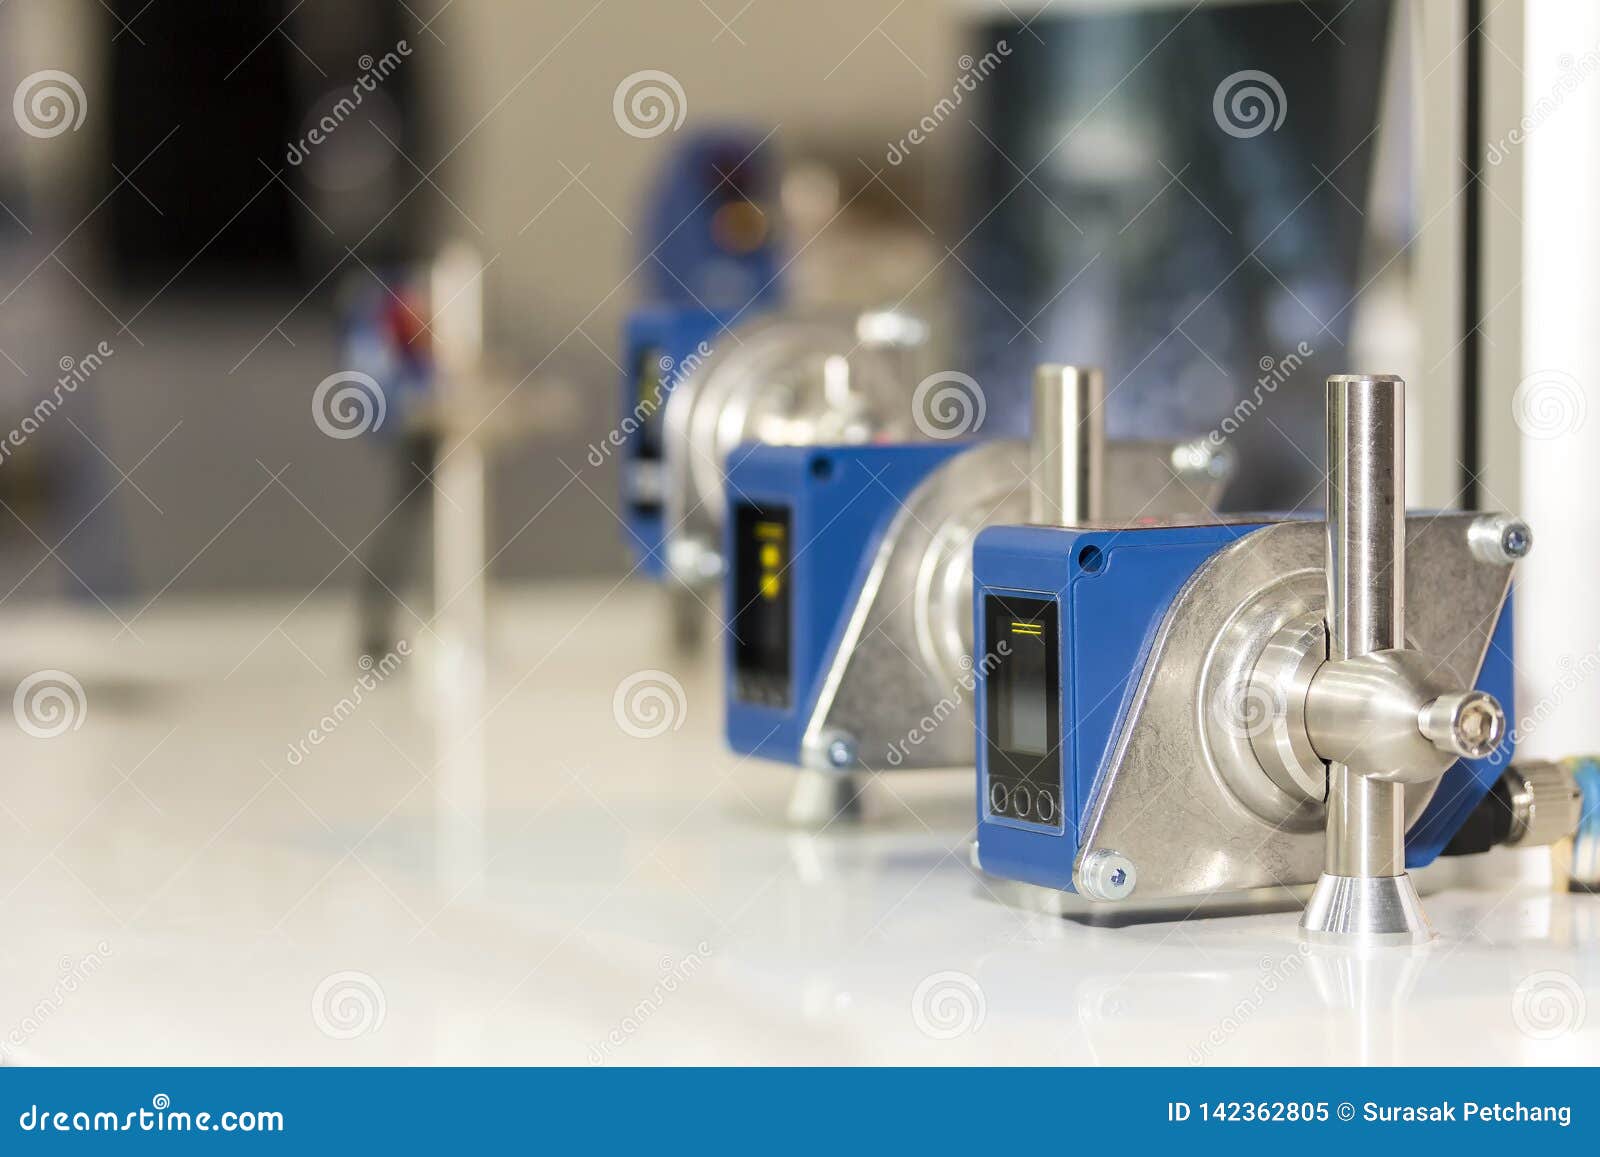 high performance and technology accuracy and fast detected laser distance sensor for industrial